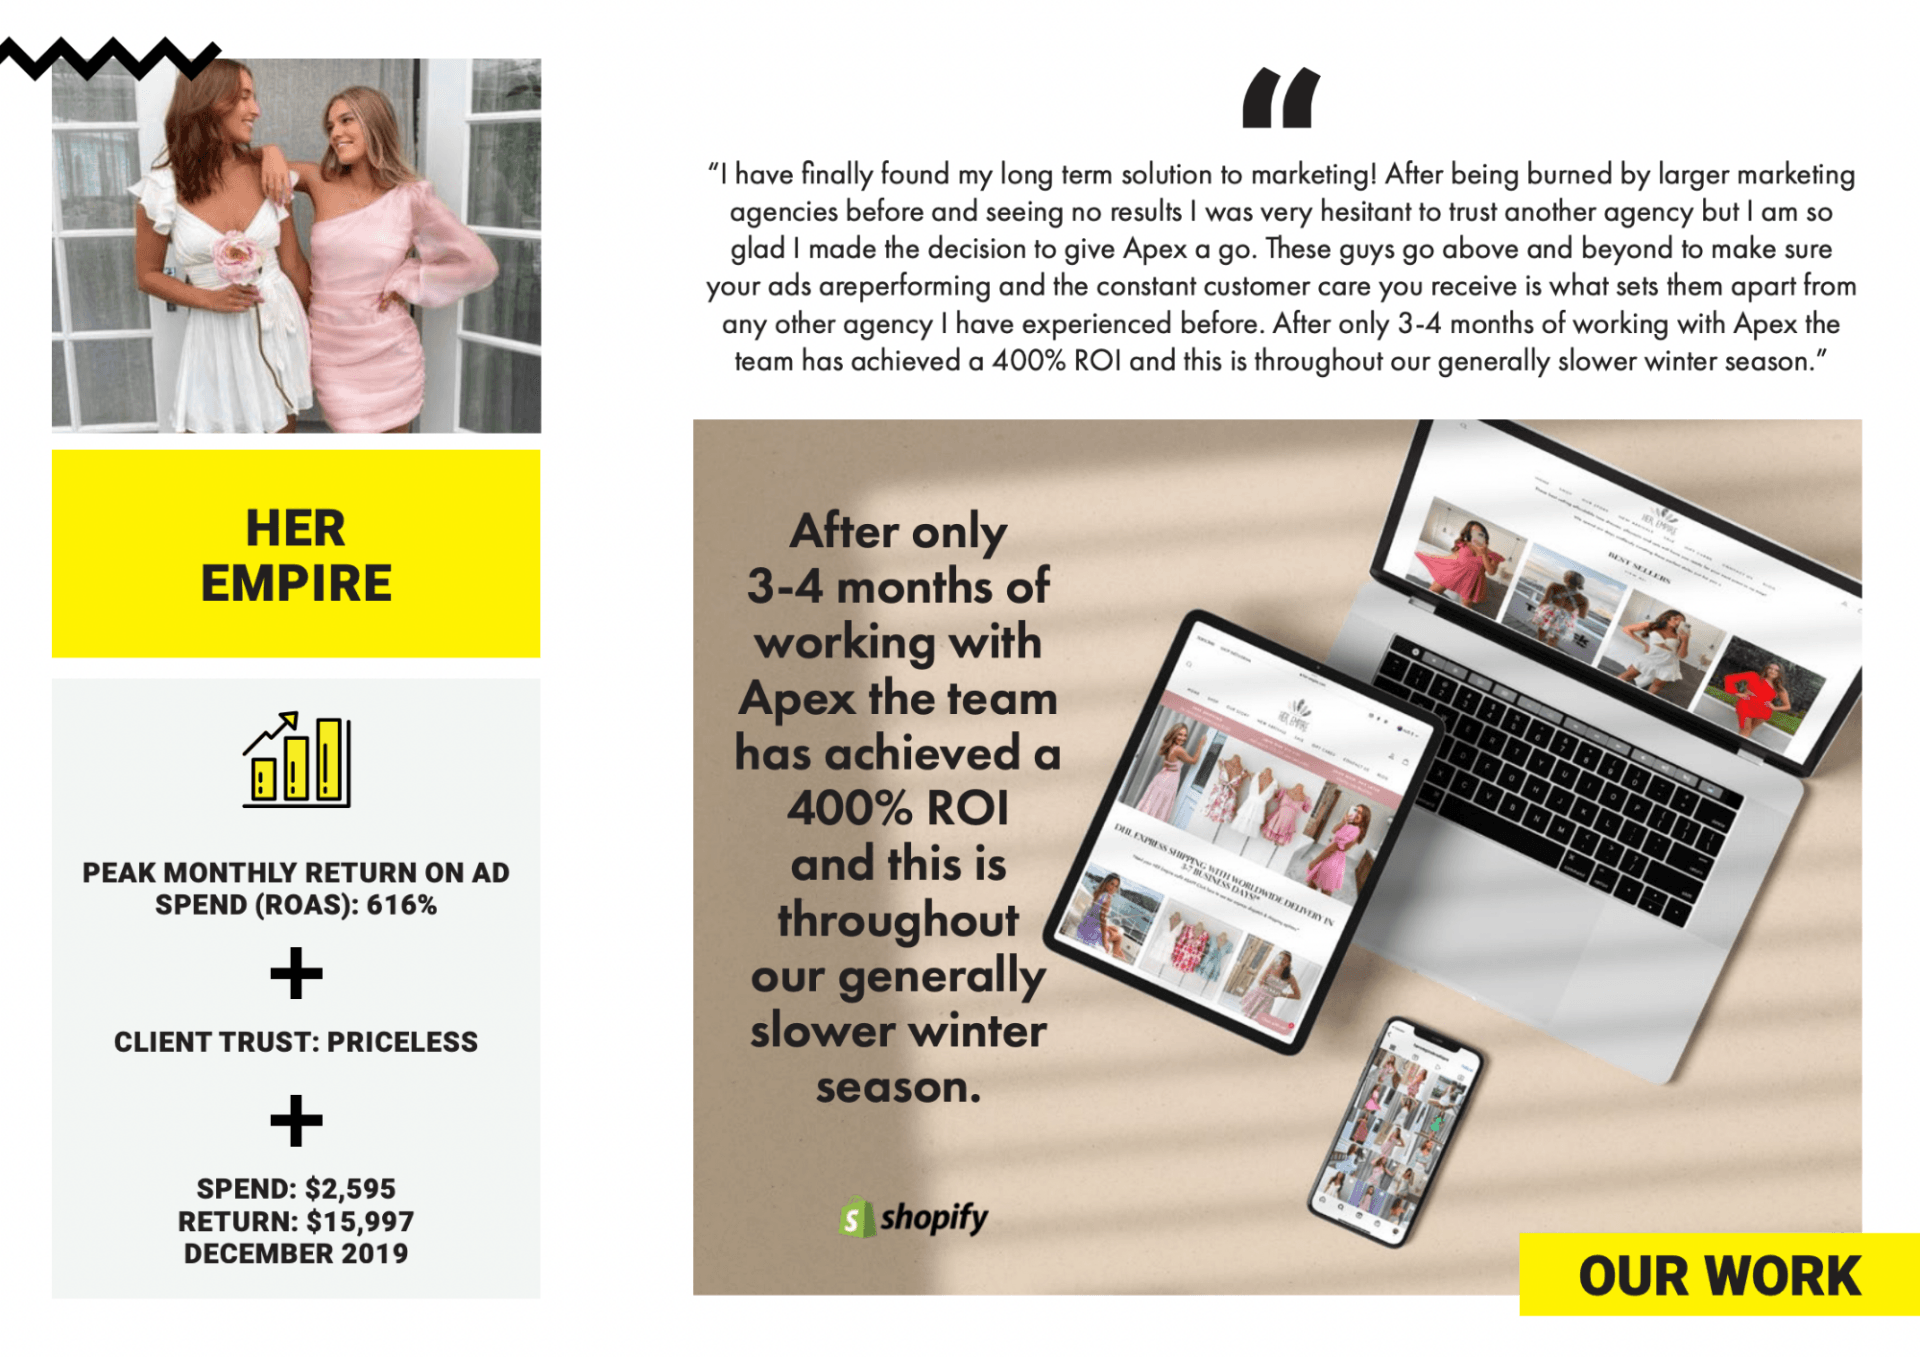 Highlighting Apex Ad Agency's Work: A scene With A Laptop, Phone, And Positive Client Reviews, Showcasing Our Commitment To Excellence. -HER EMPIRE